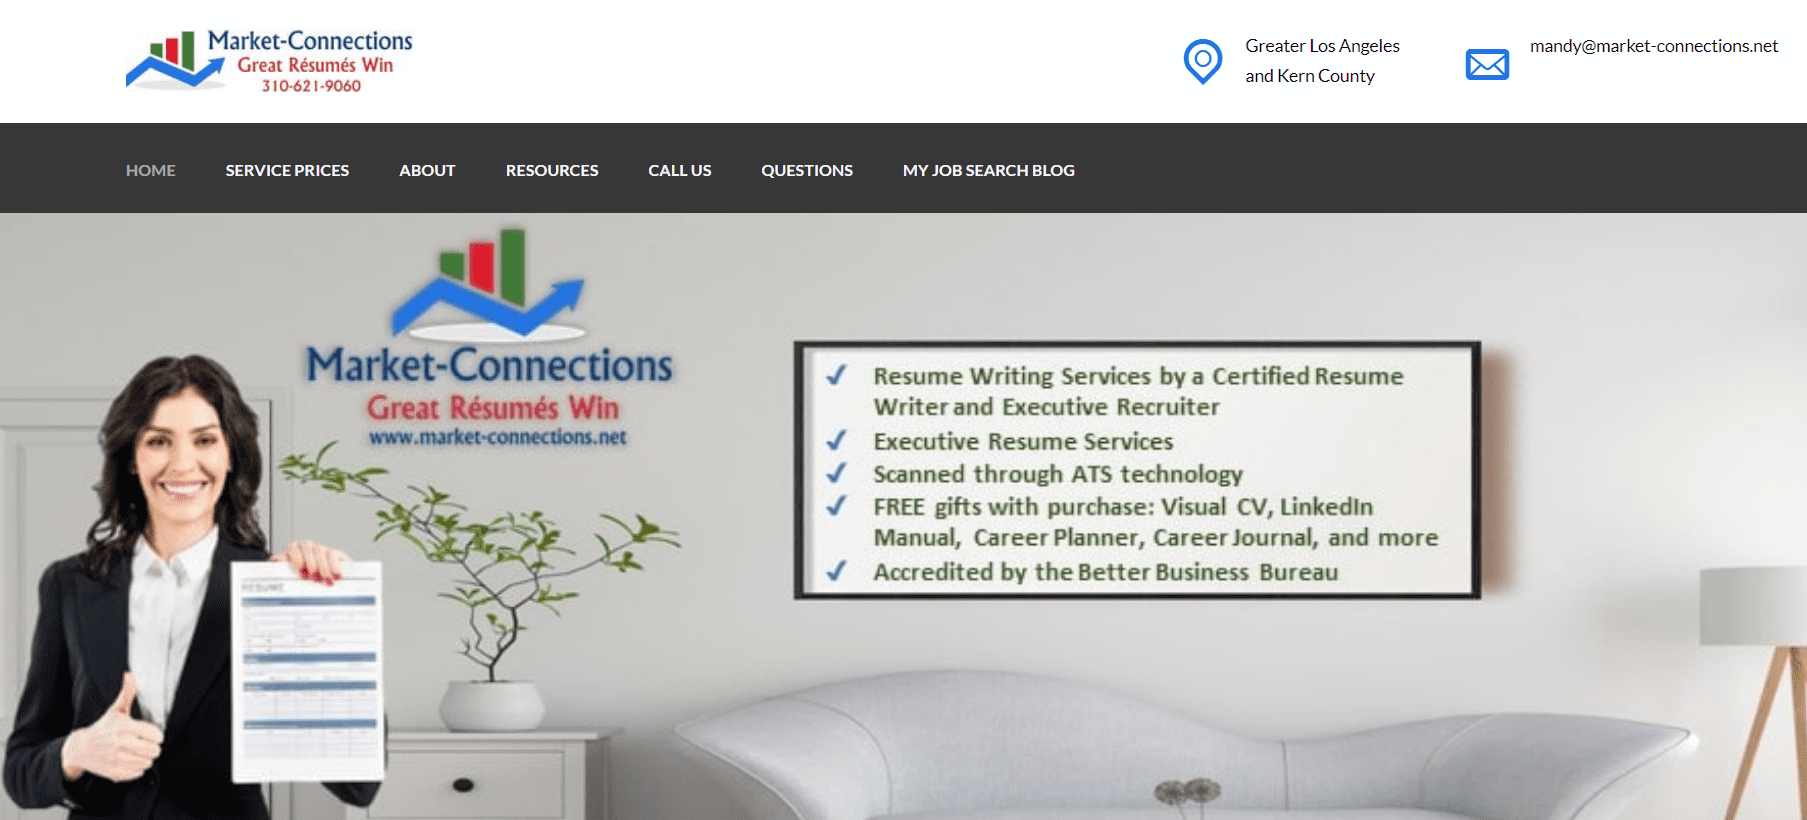 Market-Connections Homepage